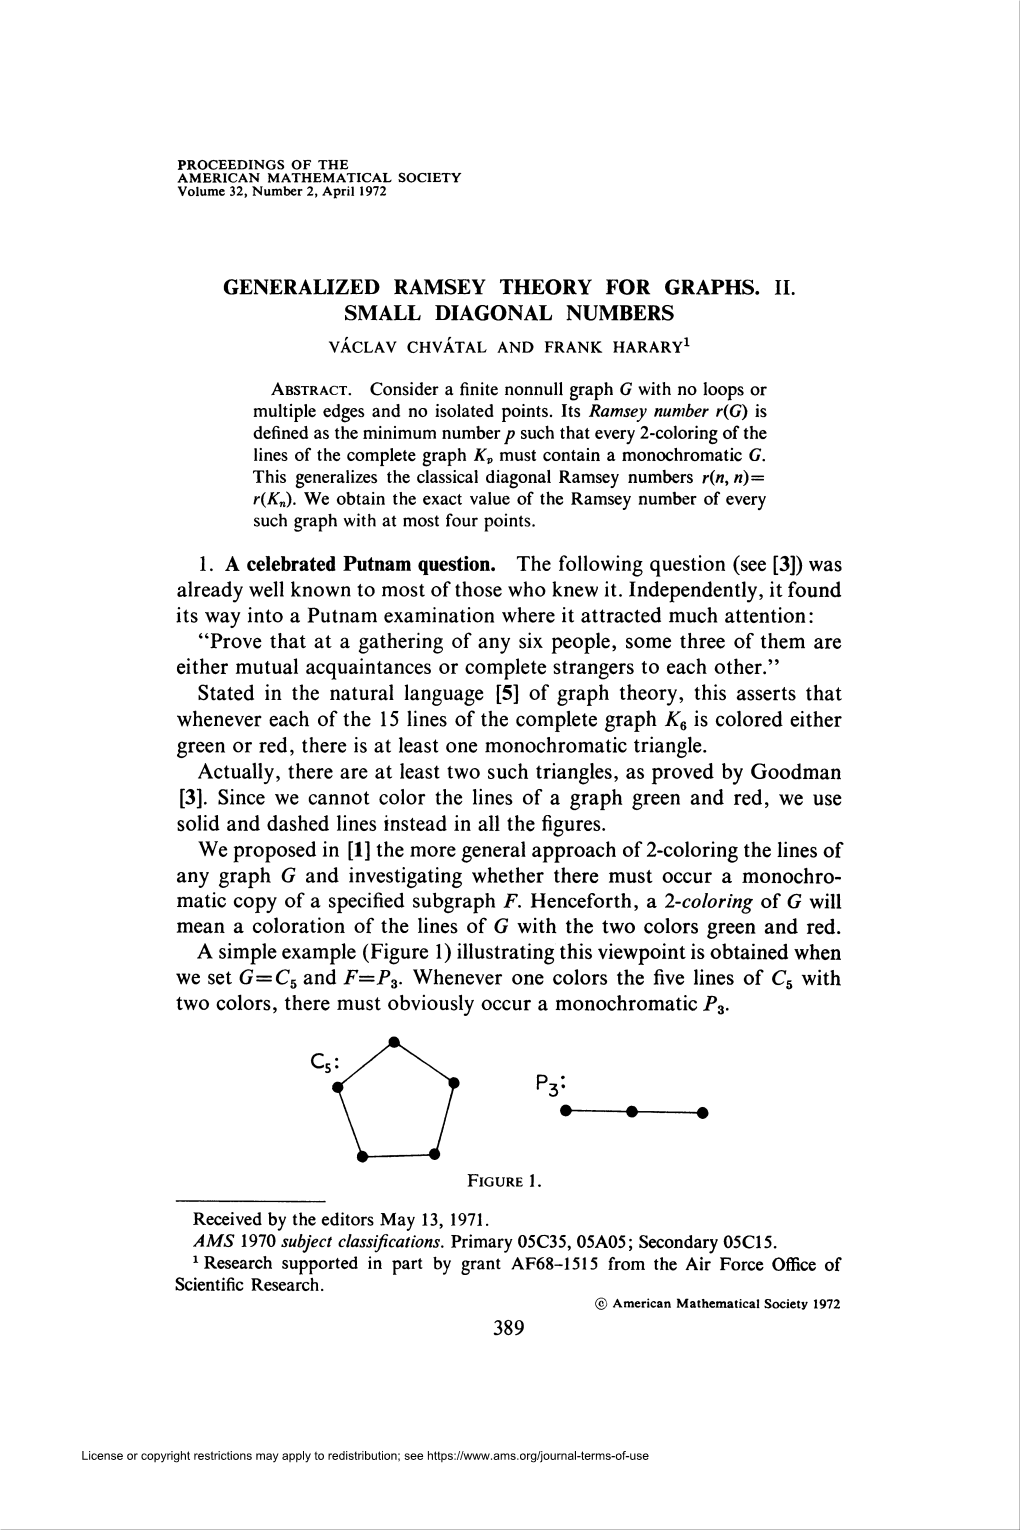 Generalized Ramsey Theory for Graphs. Ii. Small Diagonal Numbers Václav Chvátal and Frank Harary1